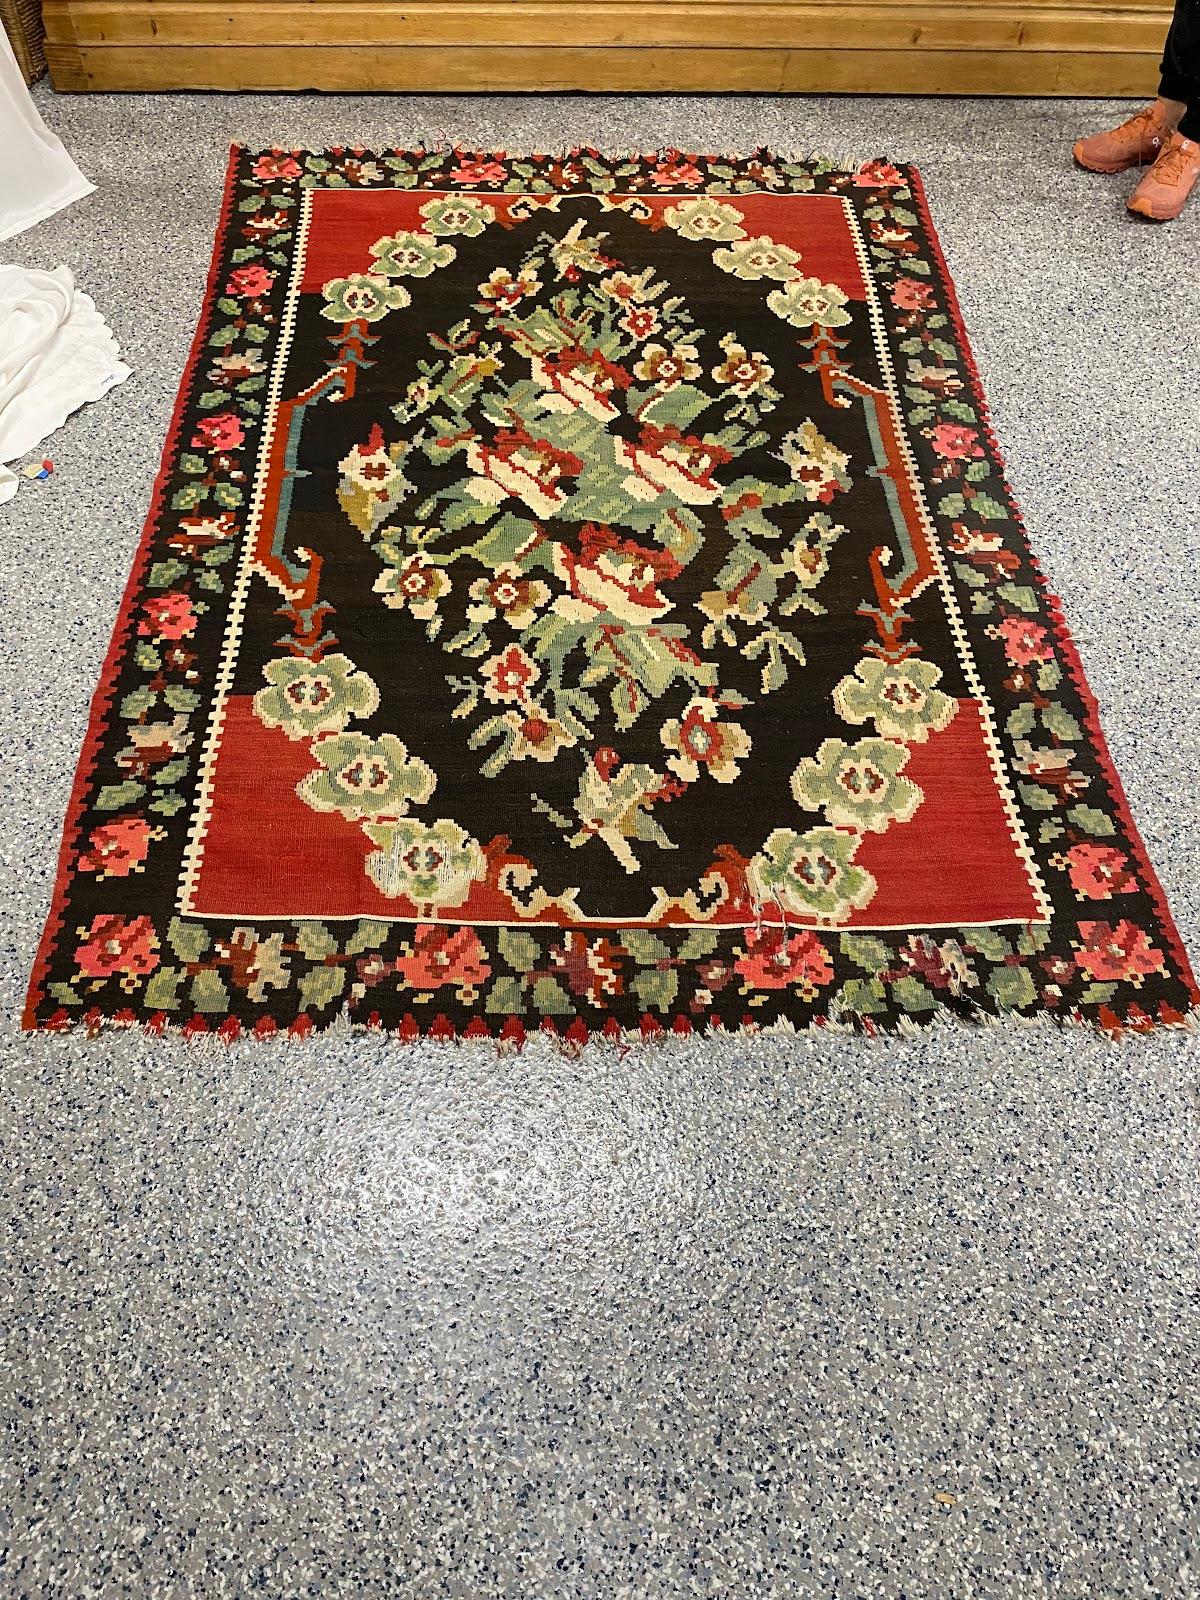  Vintage Floral Flatweave Rug in Red, Black, Brown, Green and Yellow In Good Condition For Sale In Sag Harbor, NY